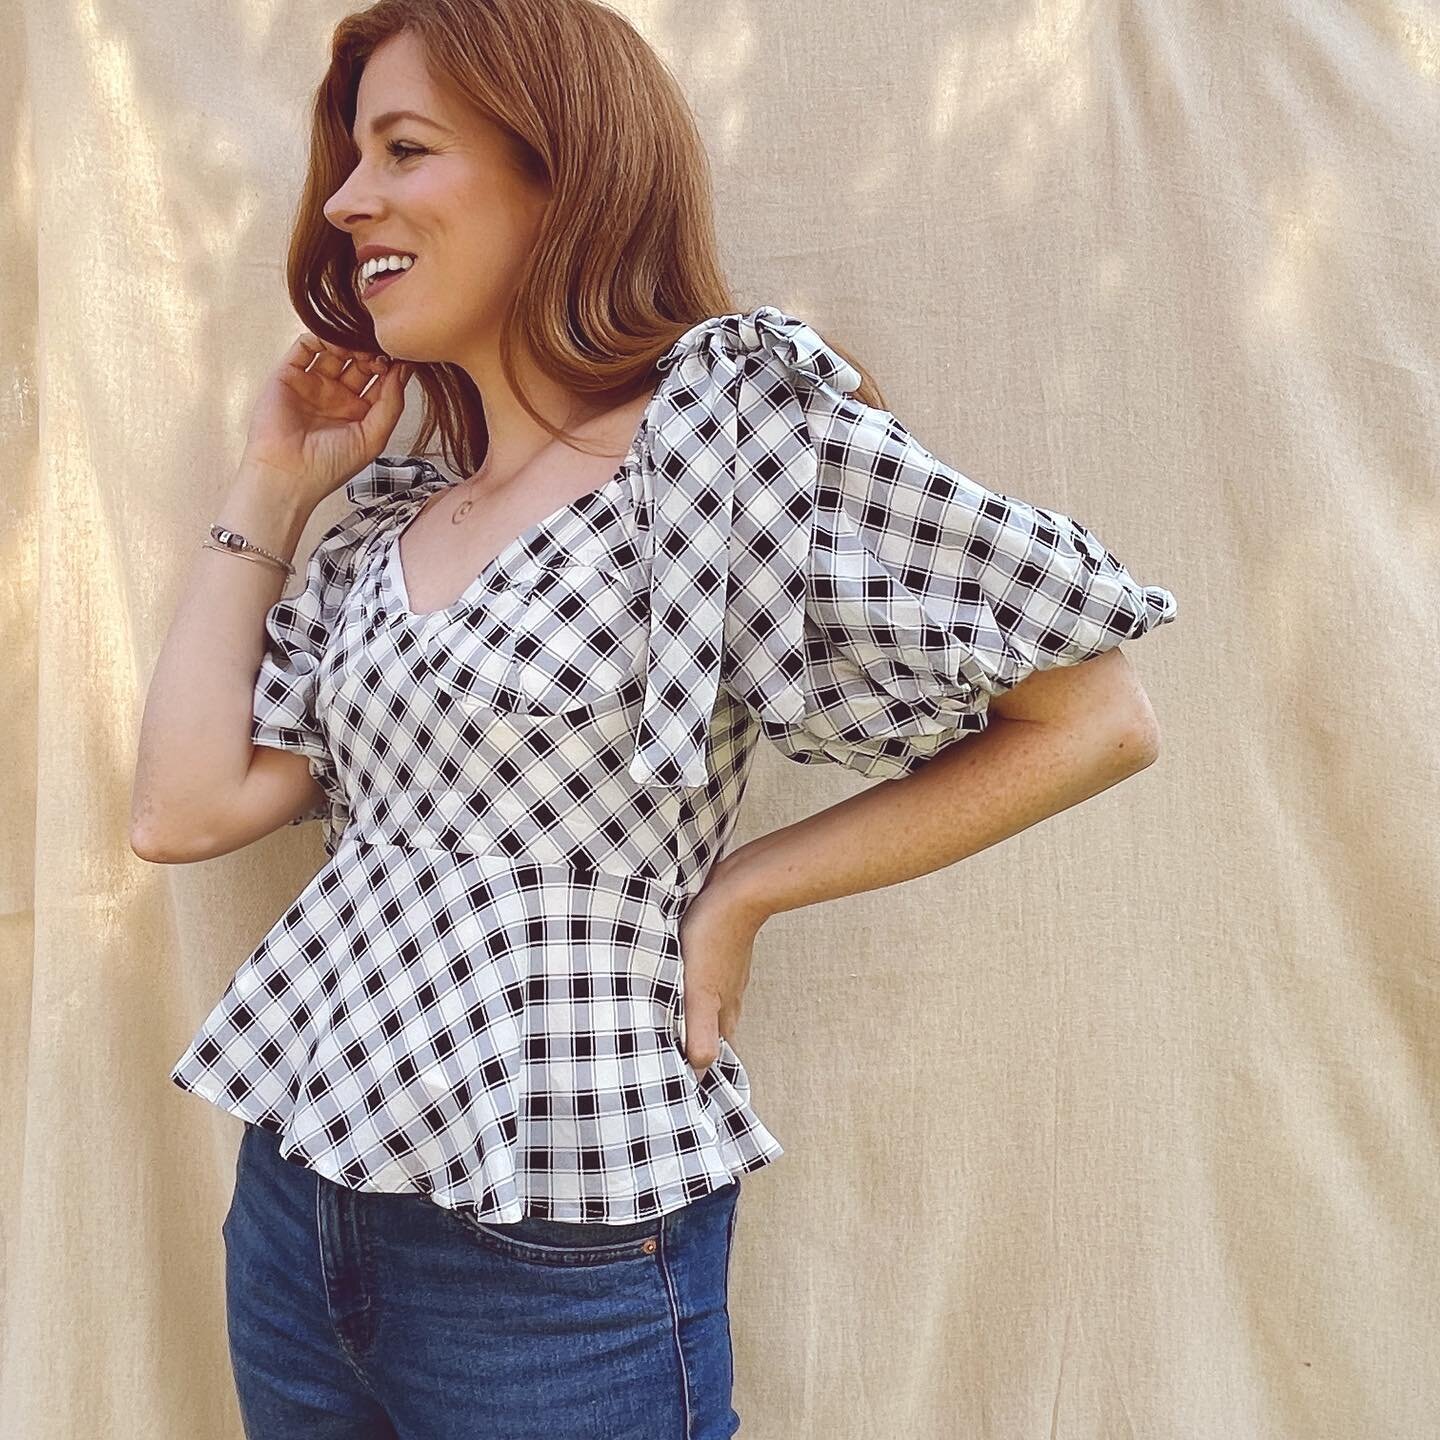 It&rsquo;s Saturday, it&rsquo;s sunny, it&rsquo;s a great day to put on something that makes you feel fabulous - oh and don&rsquo;t forget your sun cream! 

Top: @dreamsisterjane 

#gingham #ginghamtop #sharewhatyouwear #lovetowear #wearwhatyoulove #